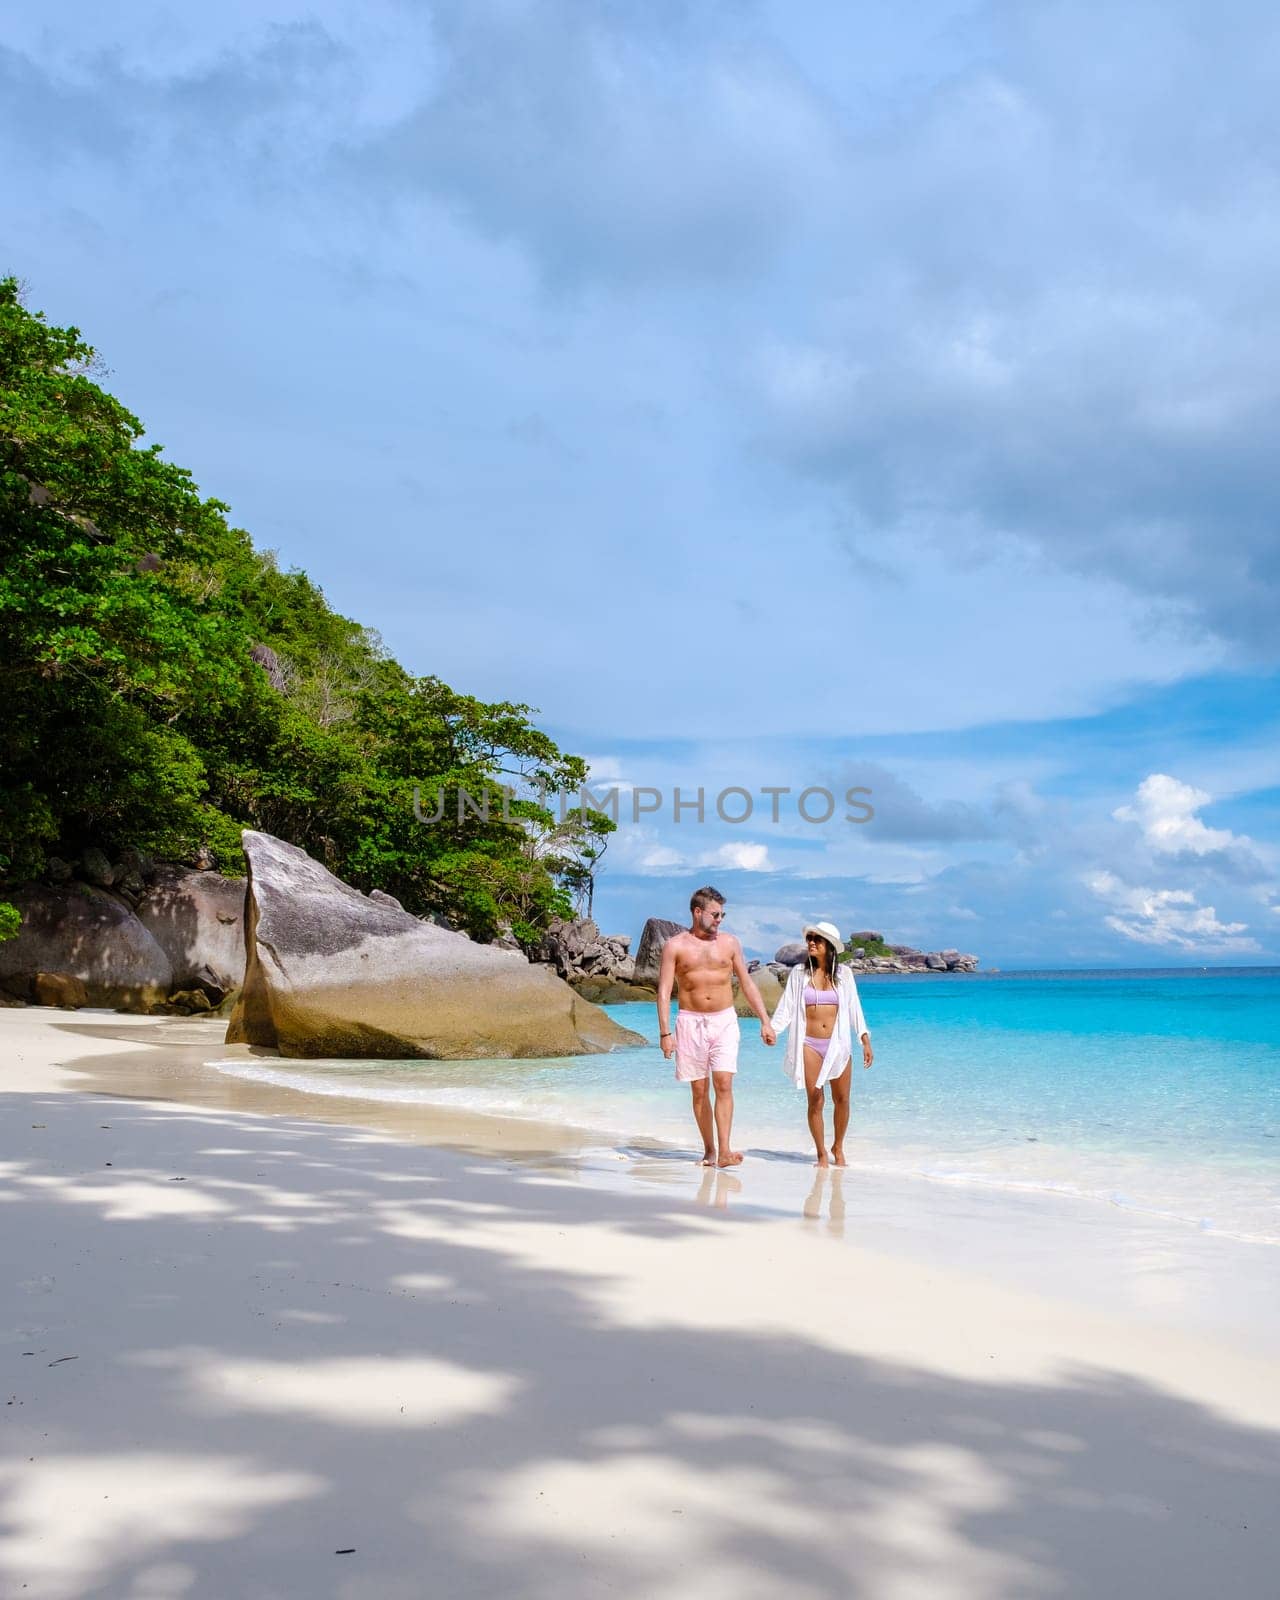 Asian women and white men relaxing on the beach in the sun at the Similan Islands Thailand by fokkebok